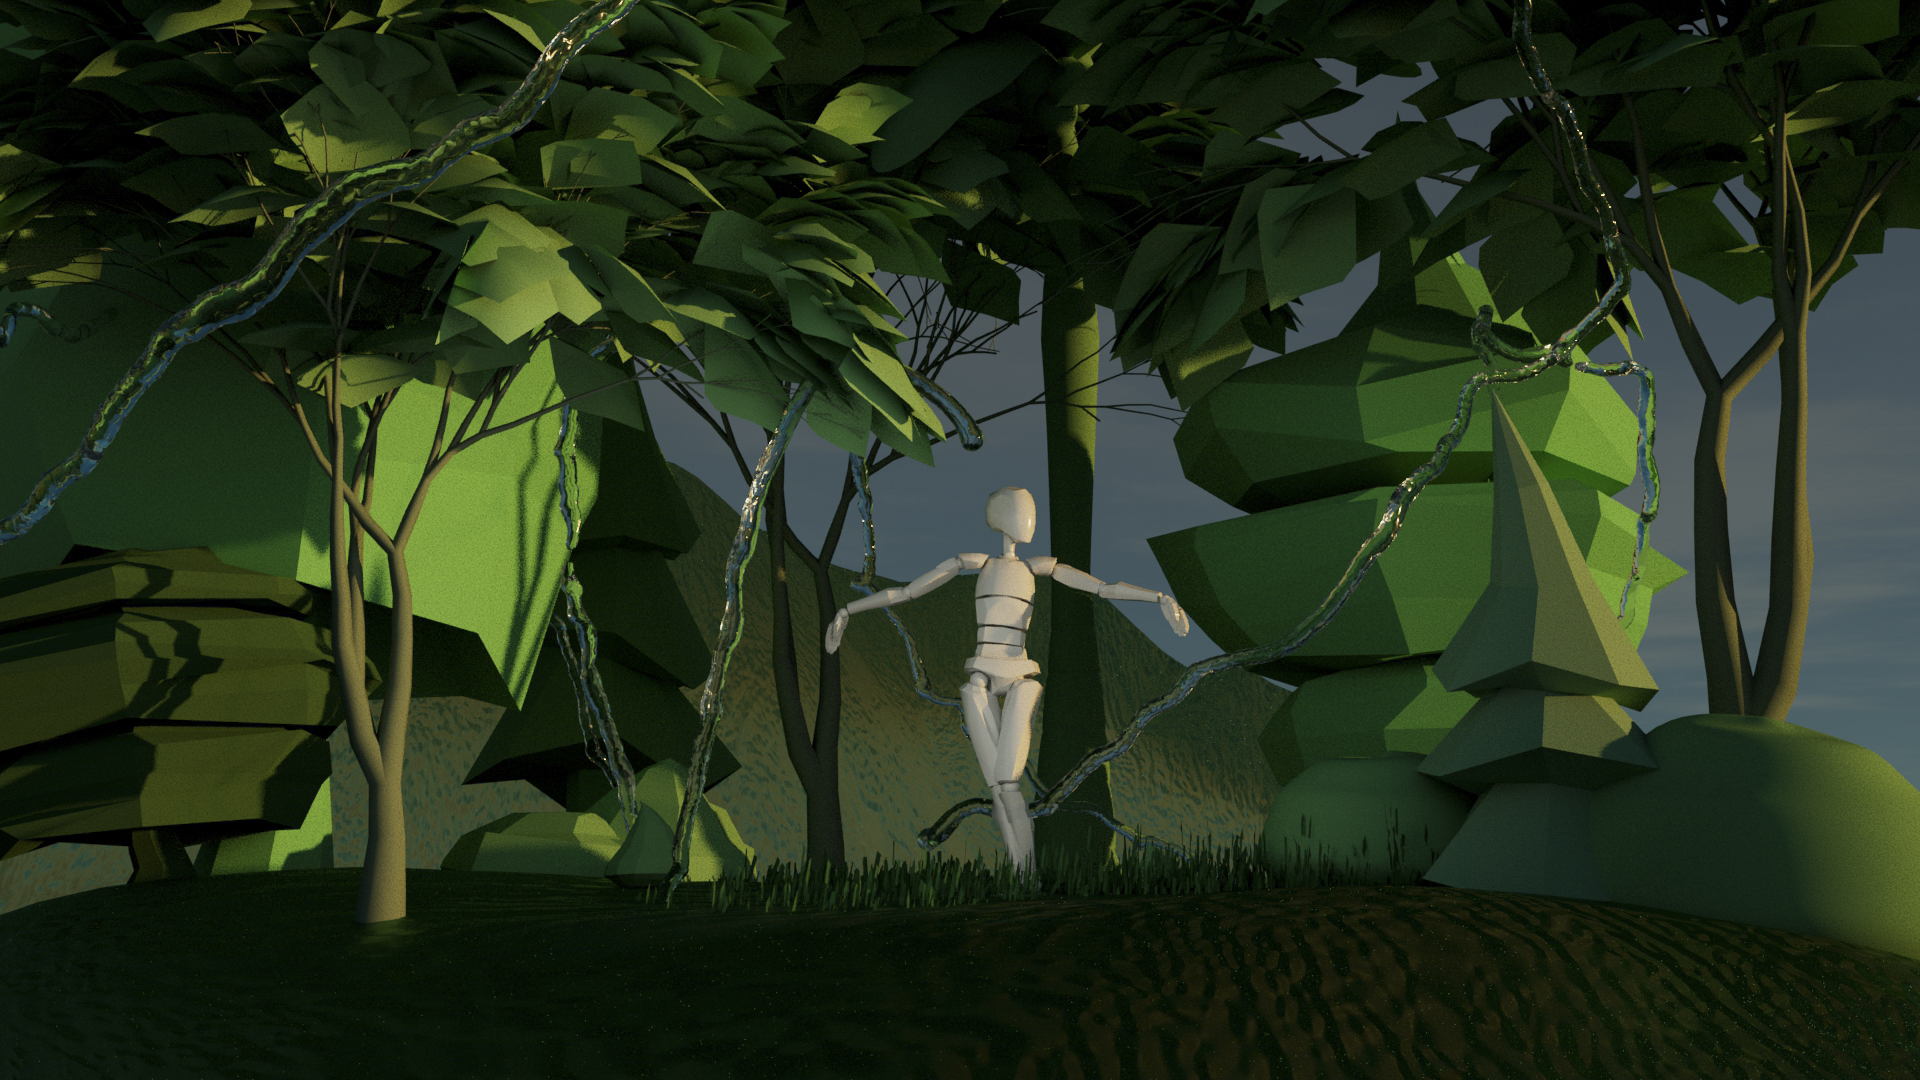 3d rendering of a figure outdoors among trees